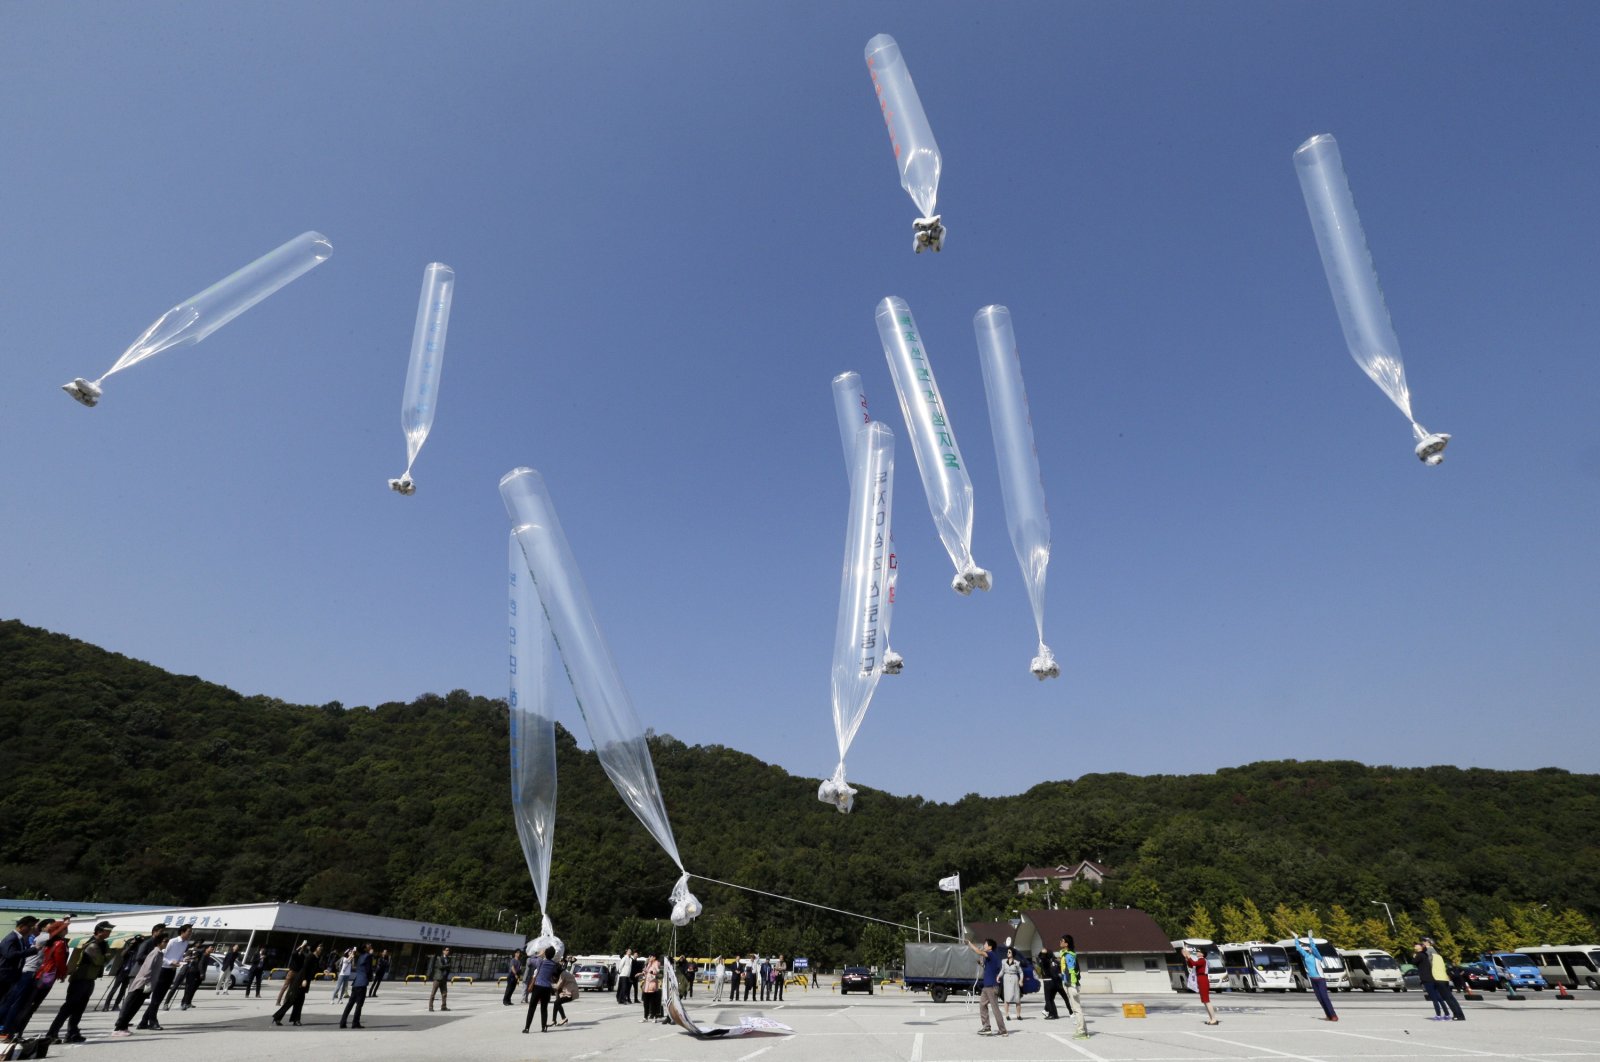 North Koran defectors release balloons carrying leaflets condemning North Korean leader Kim Jong Un and his government&#039;s policies, in Paju, near the border with North Korea, South Korea, Oct. 10, 2014. (AP Photo)